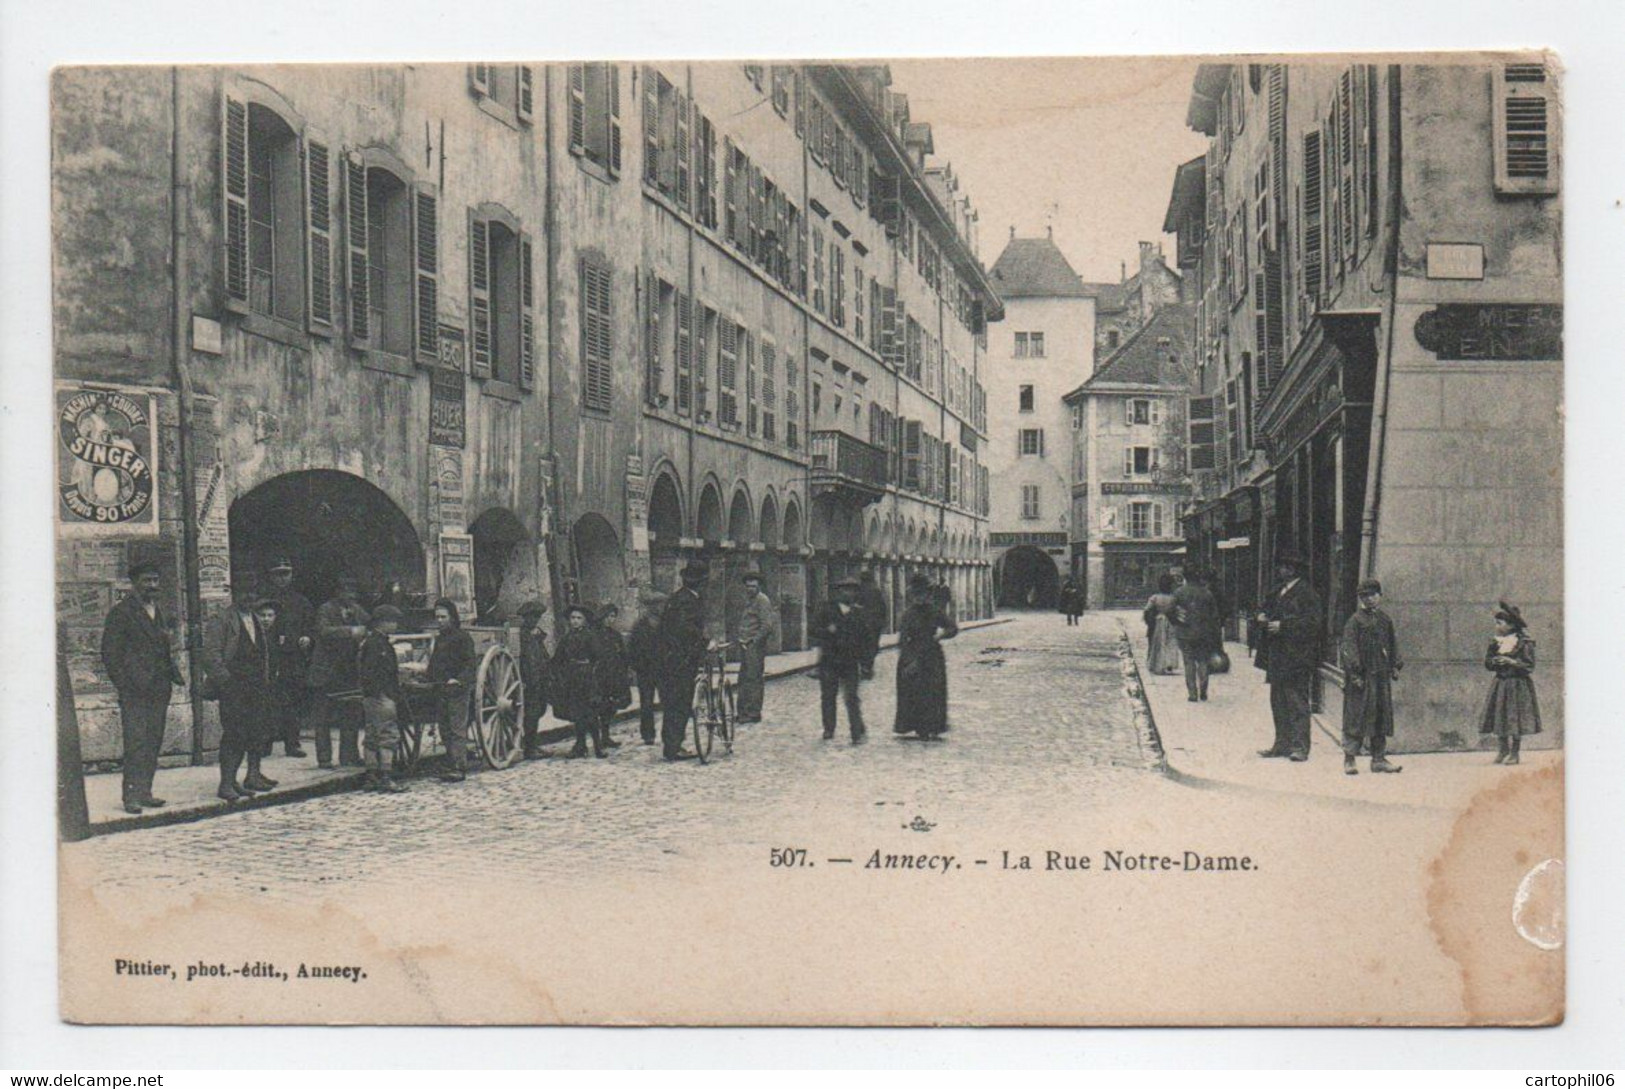 - CPA ANNECY (74) - La Rue Notre-Dame (belle Animation) - Photo-Edition Pittier 507 - - Annecy